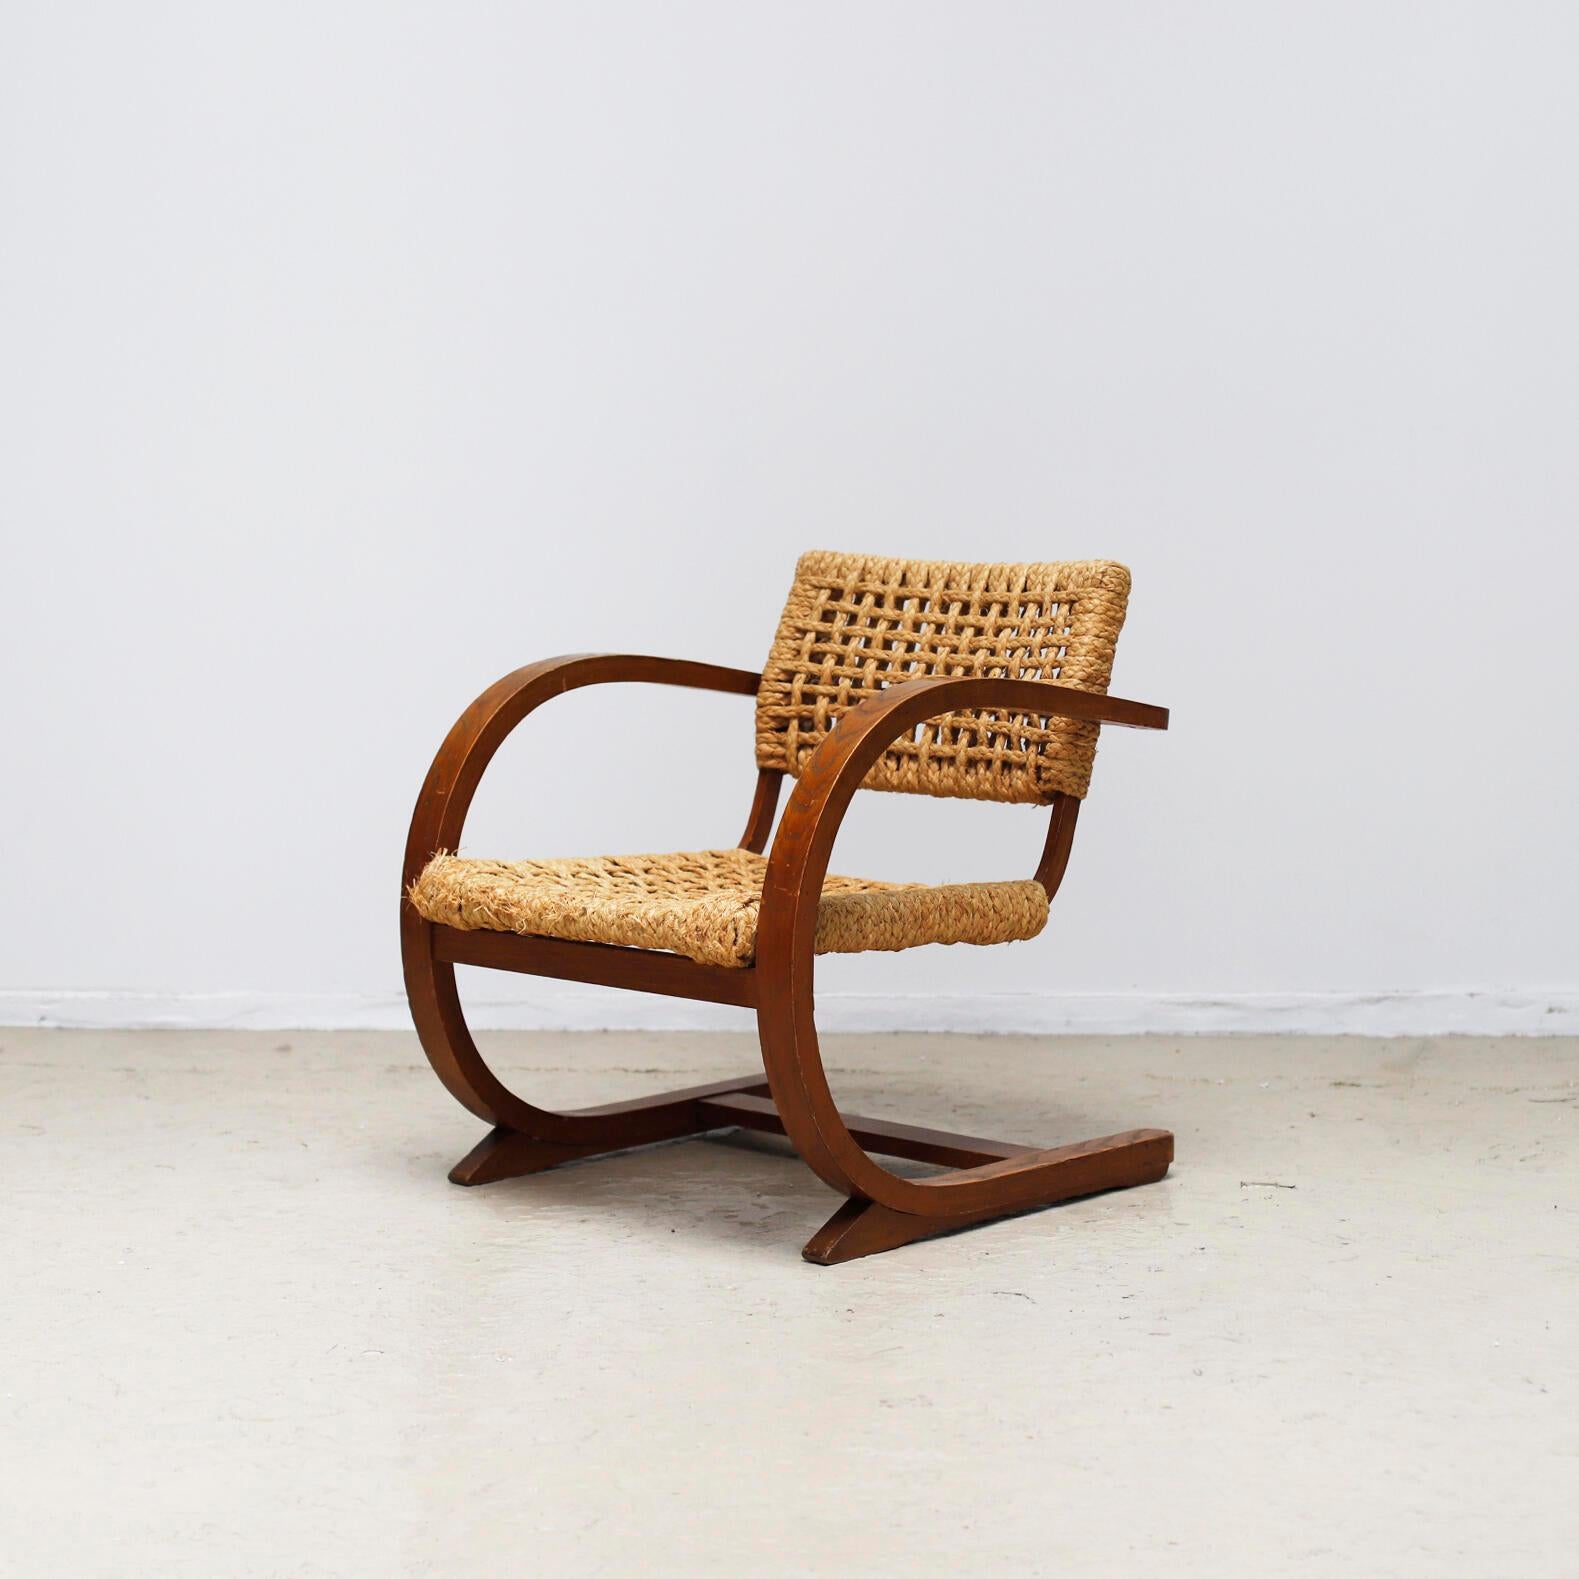 Rope armchair designed by Adrien Audoux and Frida Minet for Vibo in 1950s.
Original vintage condition and the seat and back have never been rewoven.